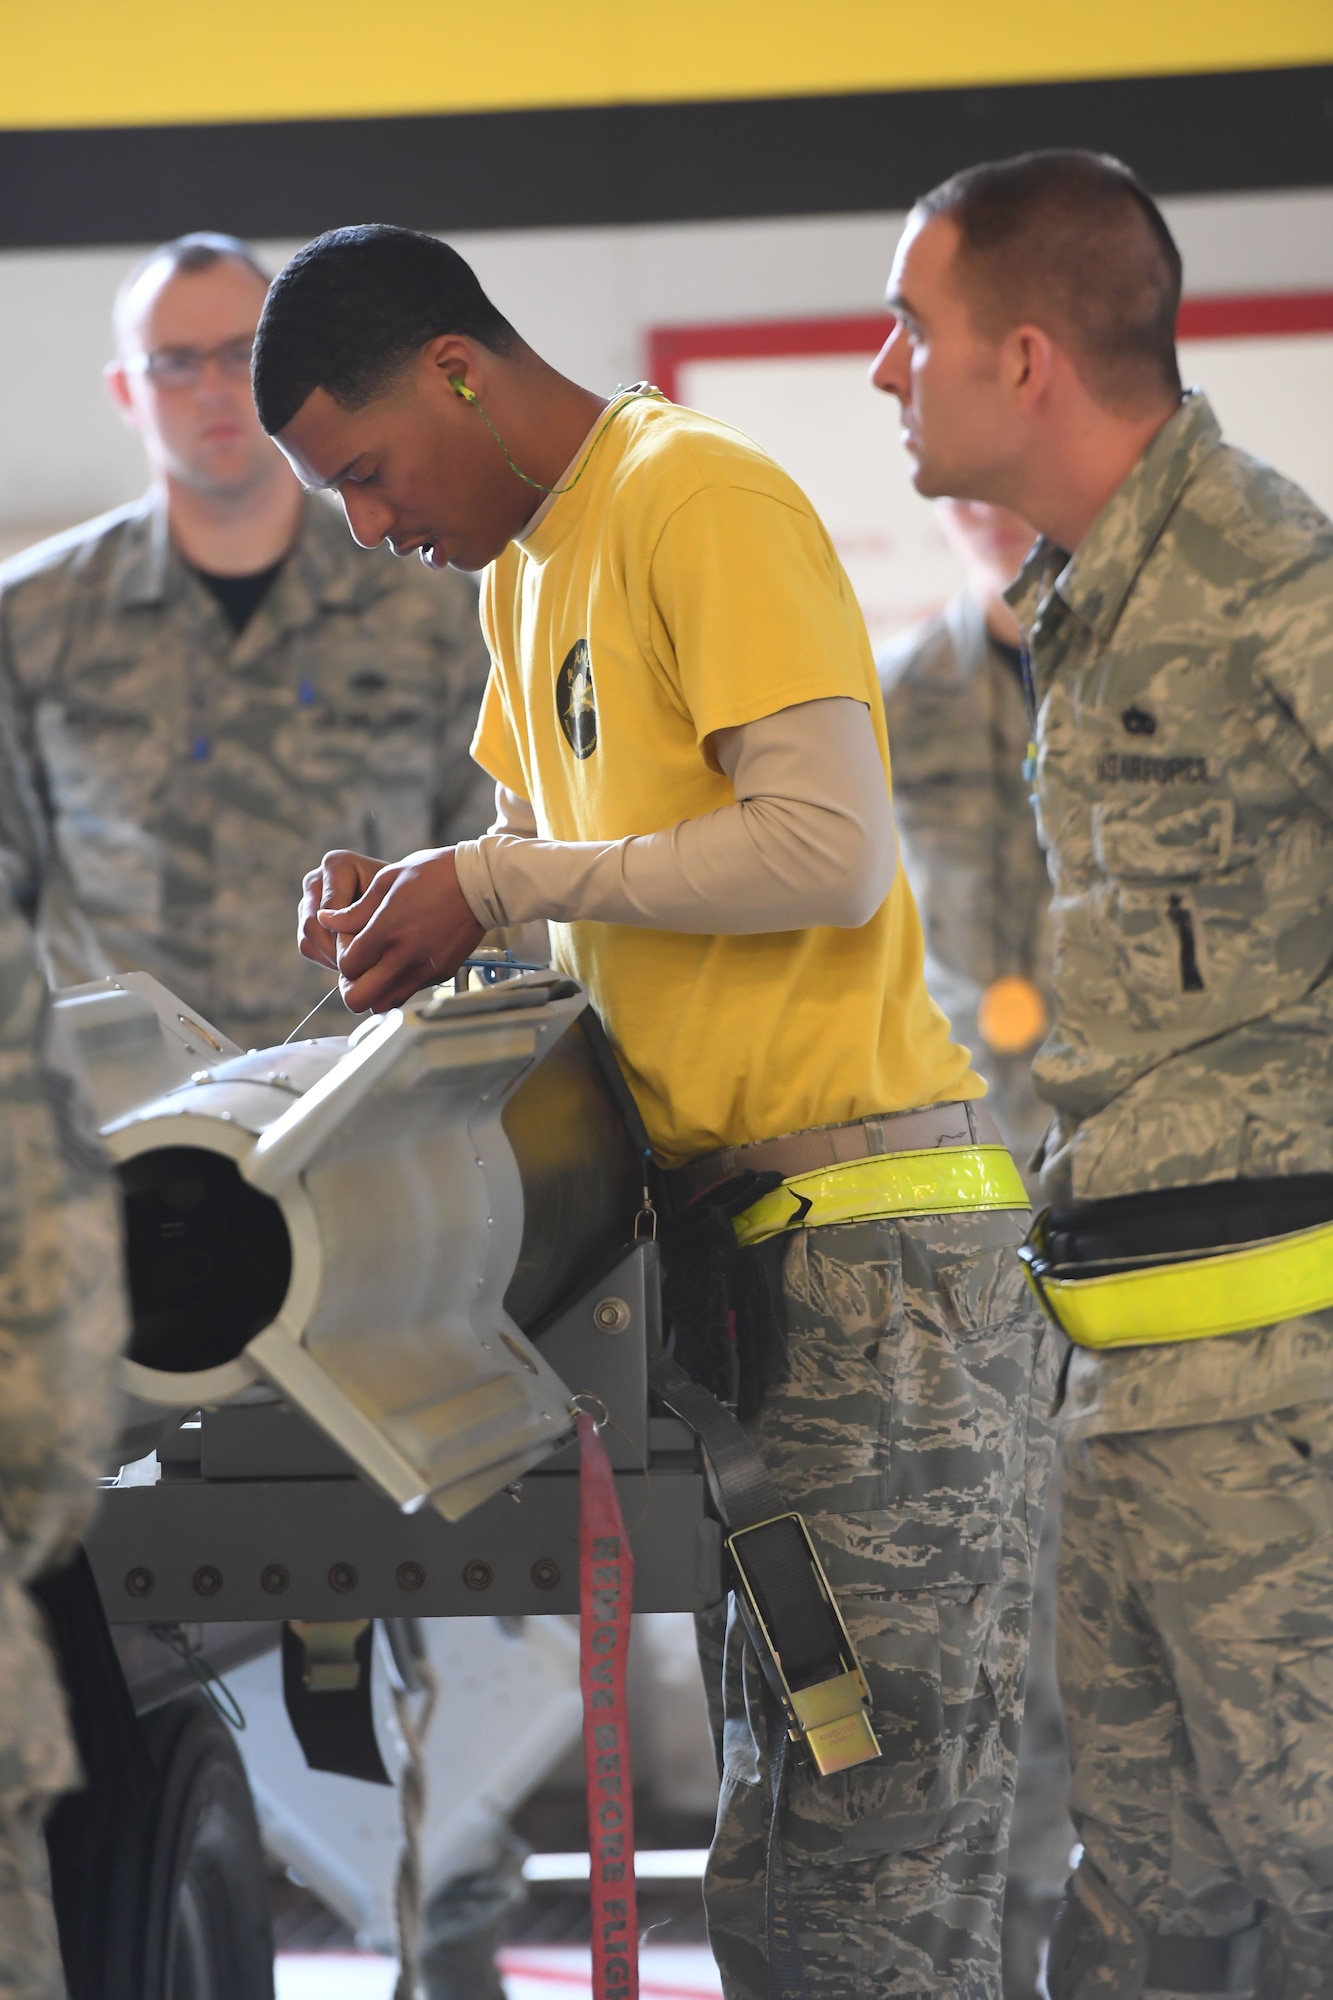 Senior Airman Deshone Davie from the 4th Aircraft Maintenance Unit in the 388th Fighter Wing preps a GBU-12 laser guided bomb during the F-35A weapons loading competition Jan. 19, 2018, at Hill Air Force Base, Utah. These competitions benefit Airmen by honing their specialty skills and bolsters comradery and friendly rivalries. (U.S. Air Force photo by Cynthia Griggs)